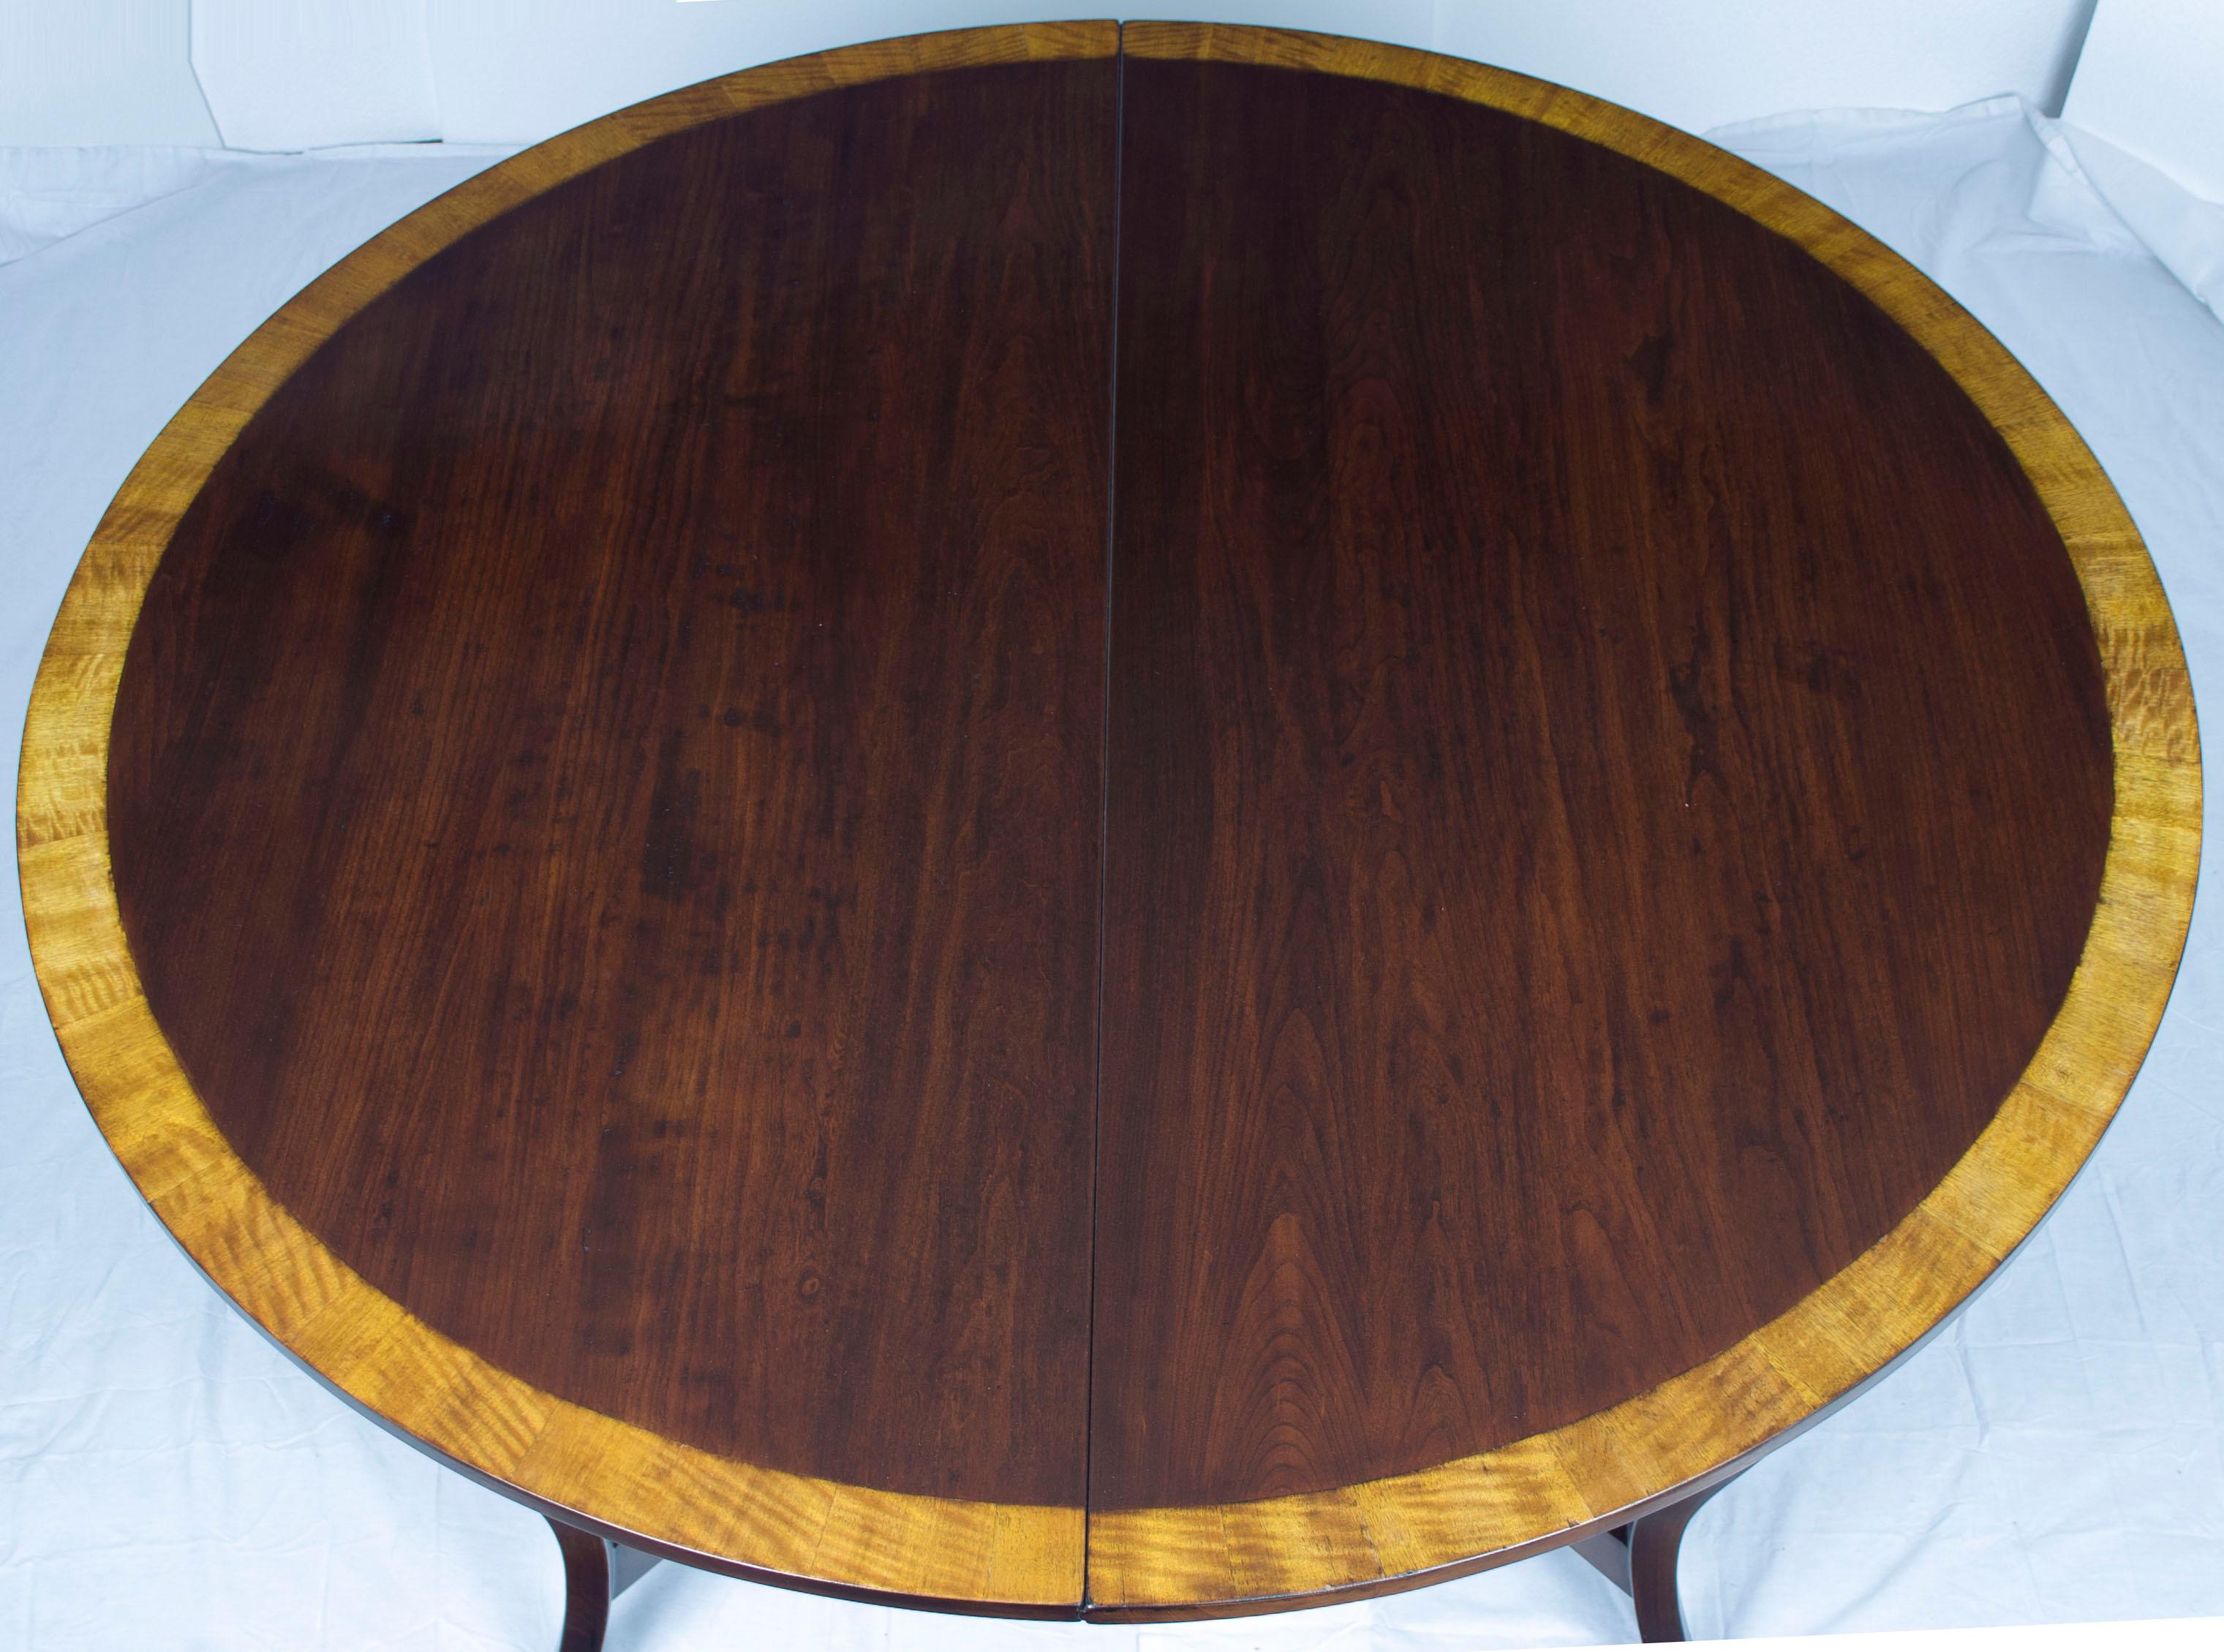 Contemporary Cherry Round Extending French Leg Dining Room Table Rustic